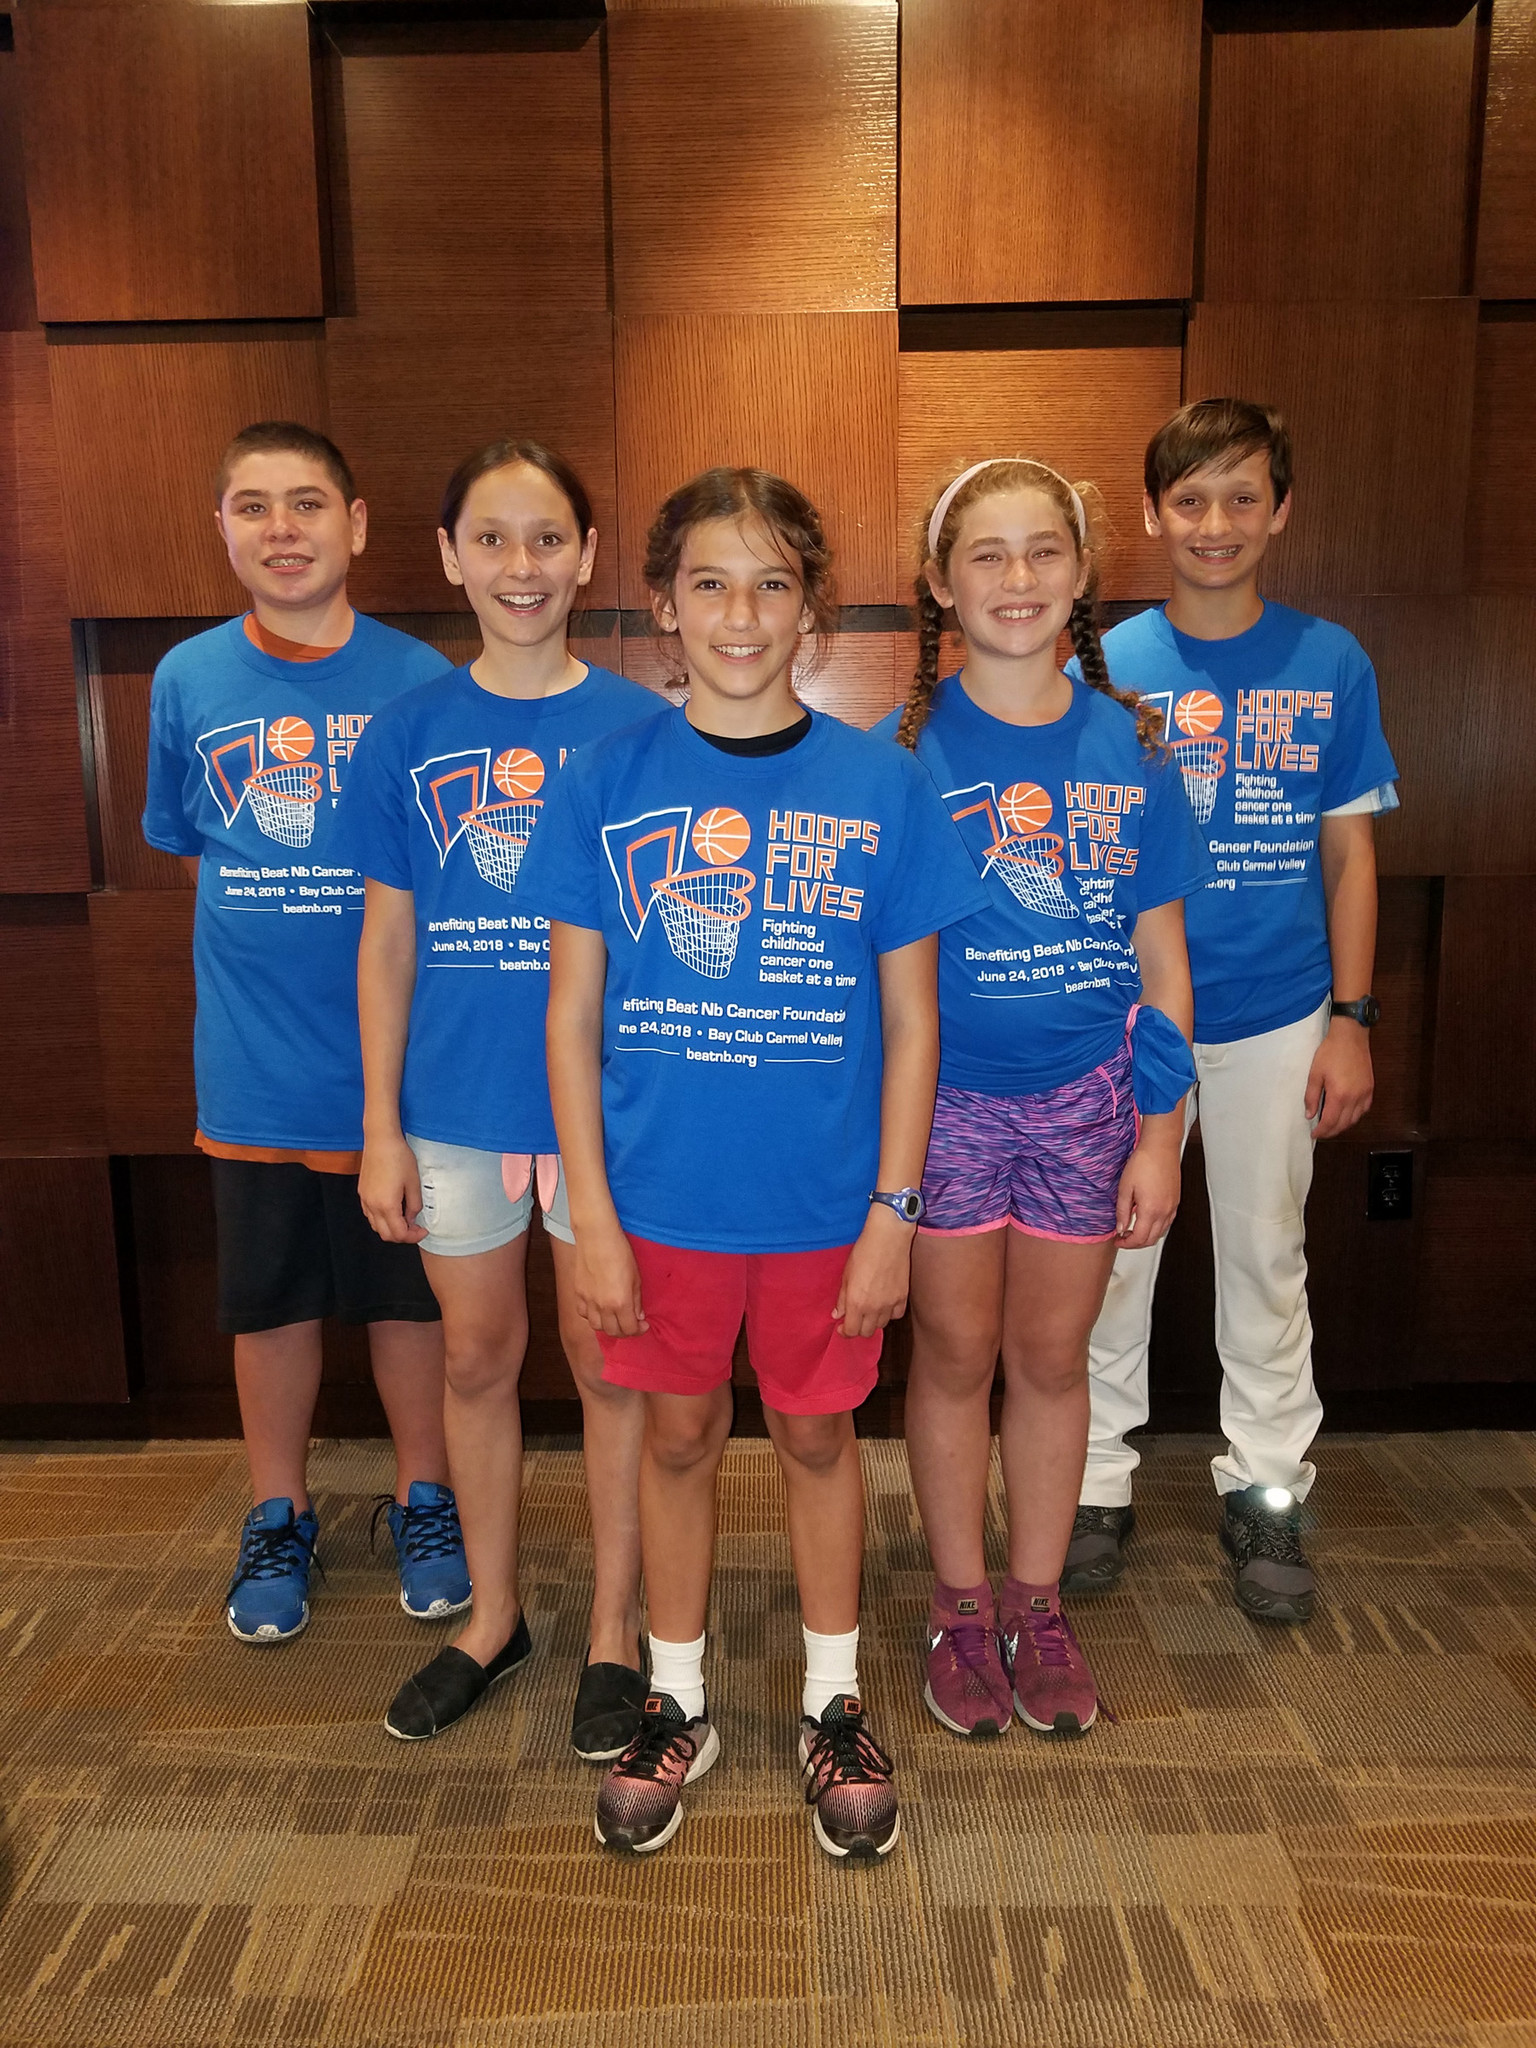 Kids helping fight kids' cancer: (L to R) Zachary Robinson, Reese Reckles, Julia Maurer, Ellery Robinson, Spencer Reckles